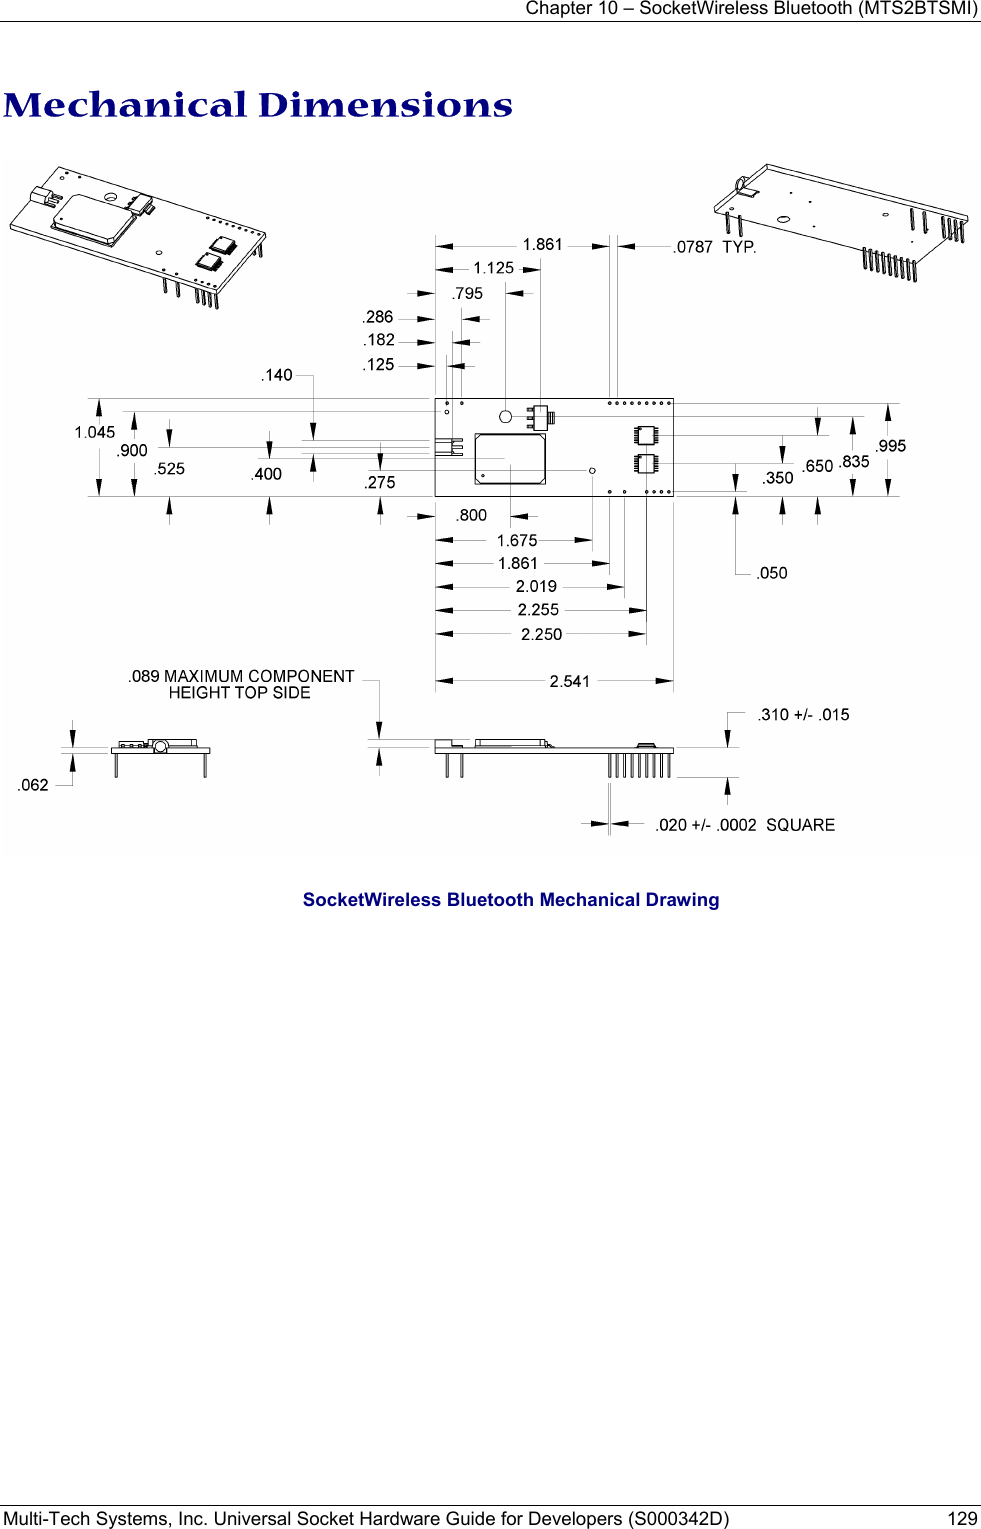 Chapter 10 – SocketWireless Bluetooth (MTS2BTSMI) Multi-Tech Systems, Inc. Universal Socket Hardware Guide for Developers (S000342D)  129  Mechanical Dimensions    SocketWireless Bluetooth Mechanical Drawing  